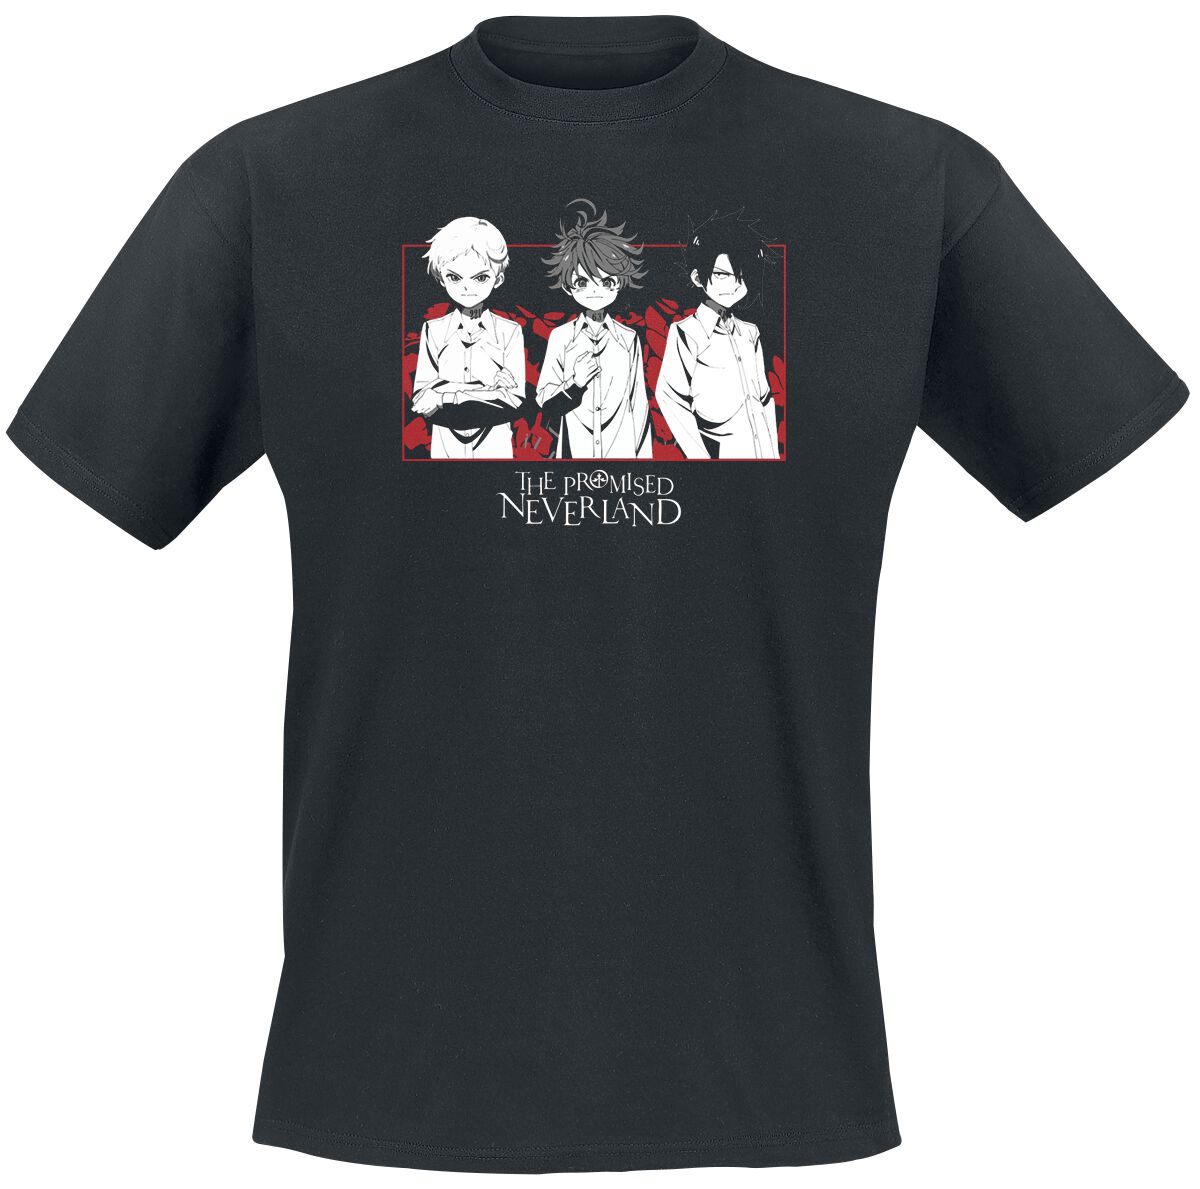 The Promised Neverland Emma, Norman T-Shirt schwarz in M